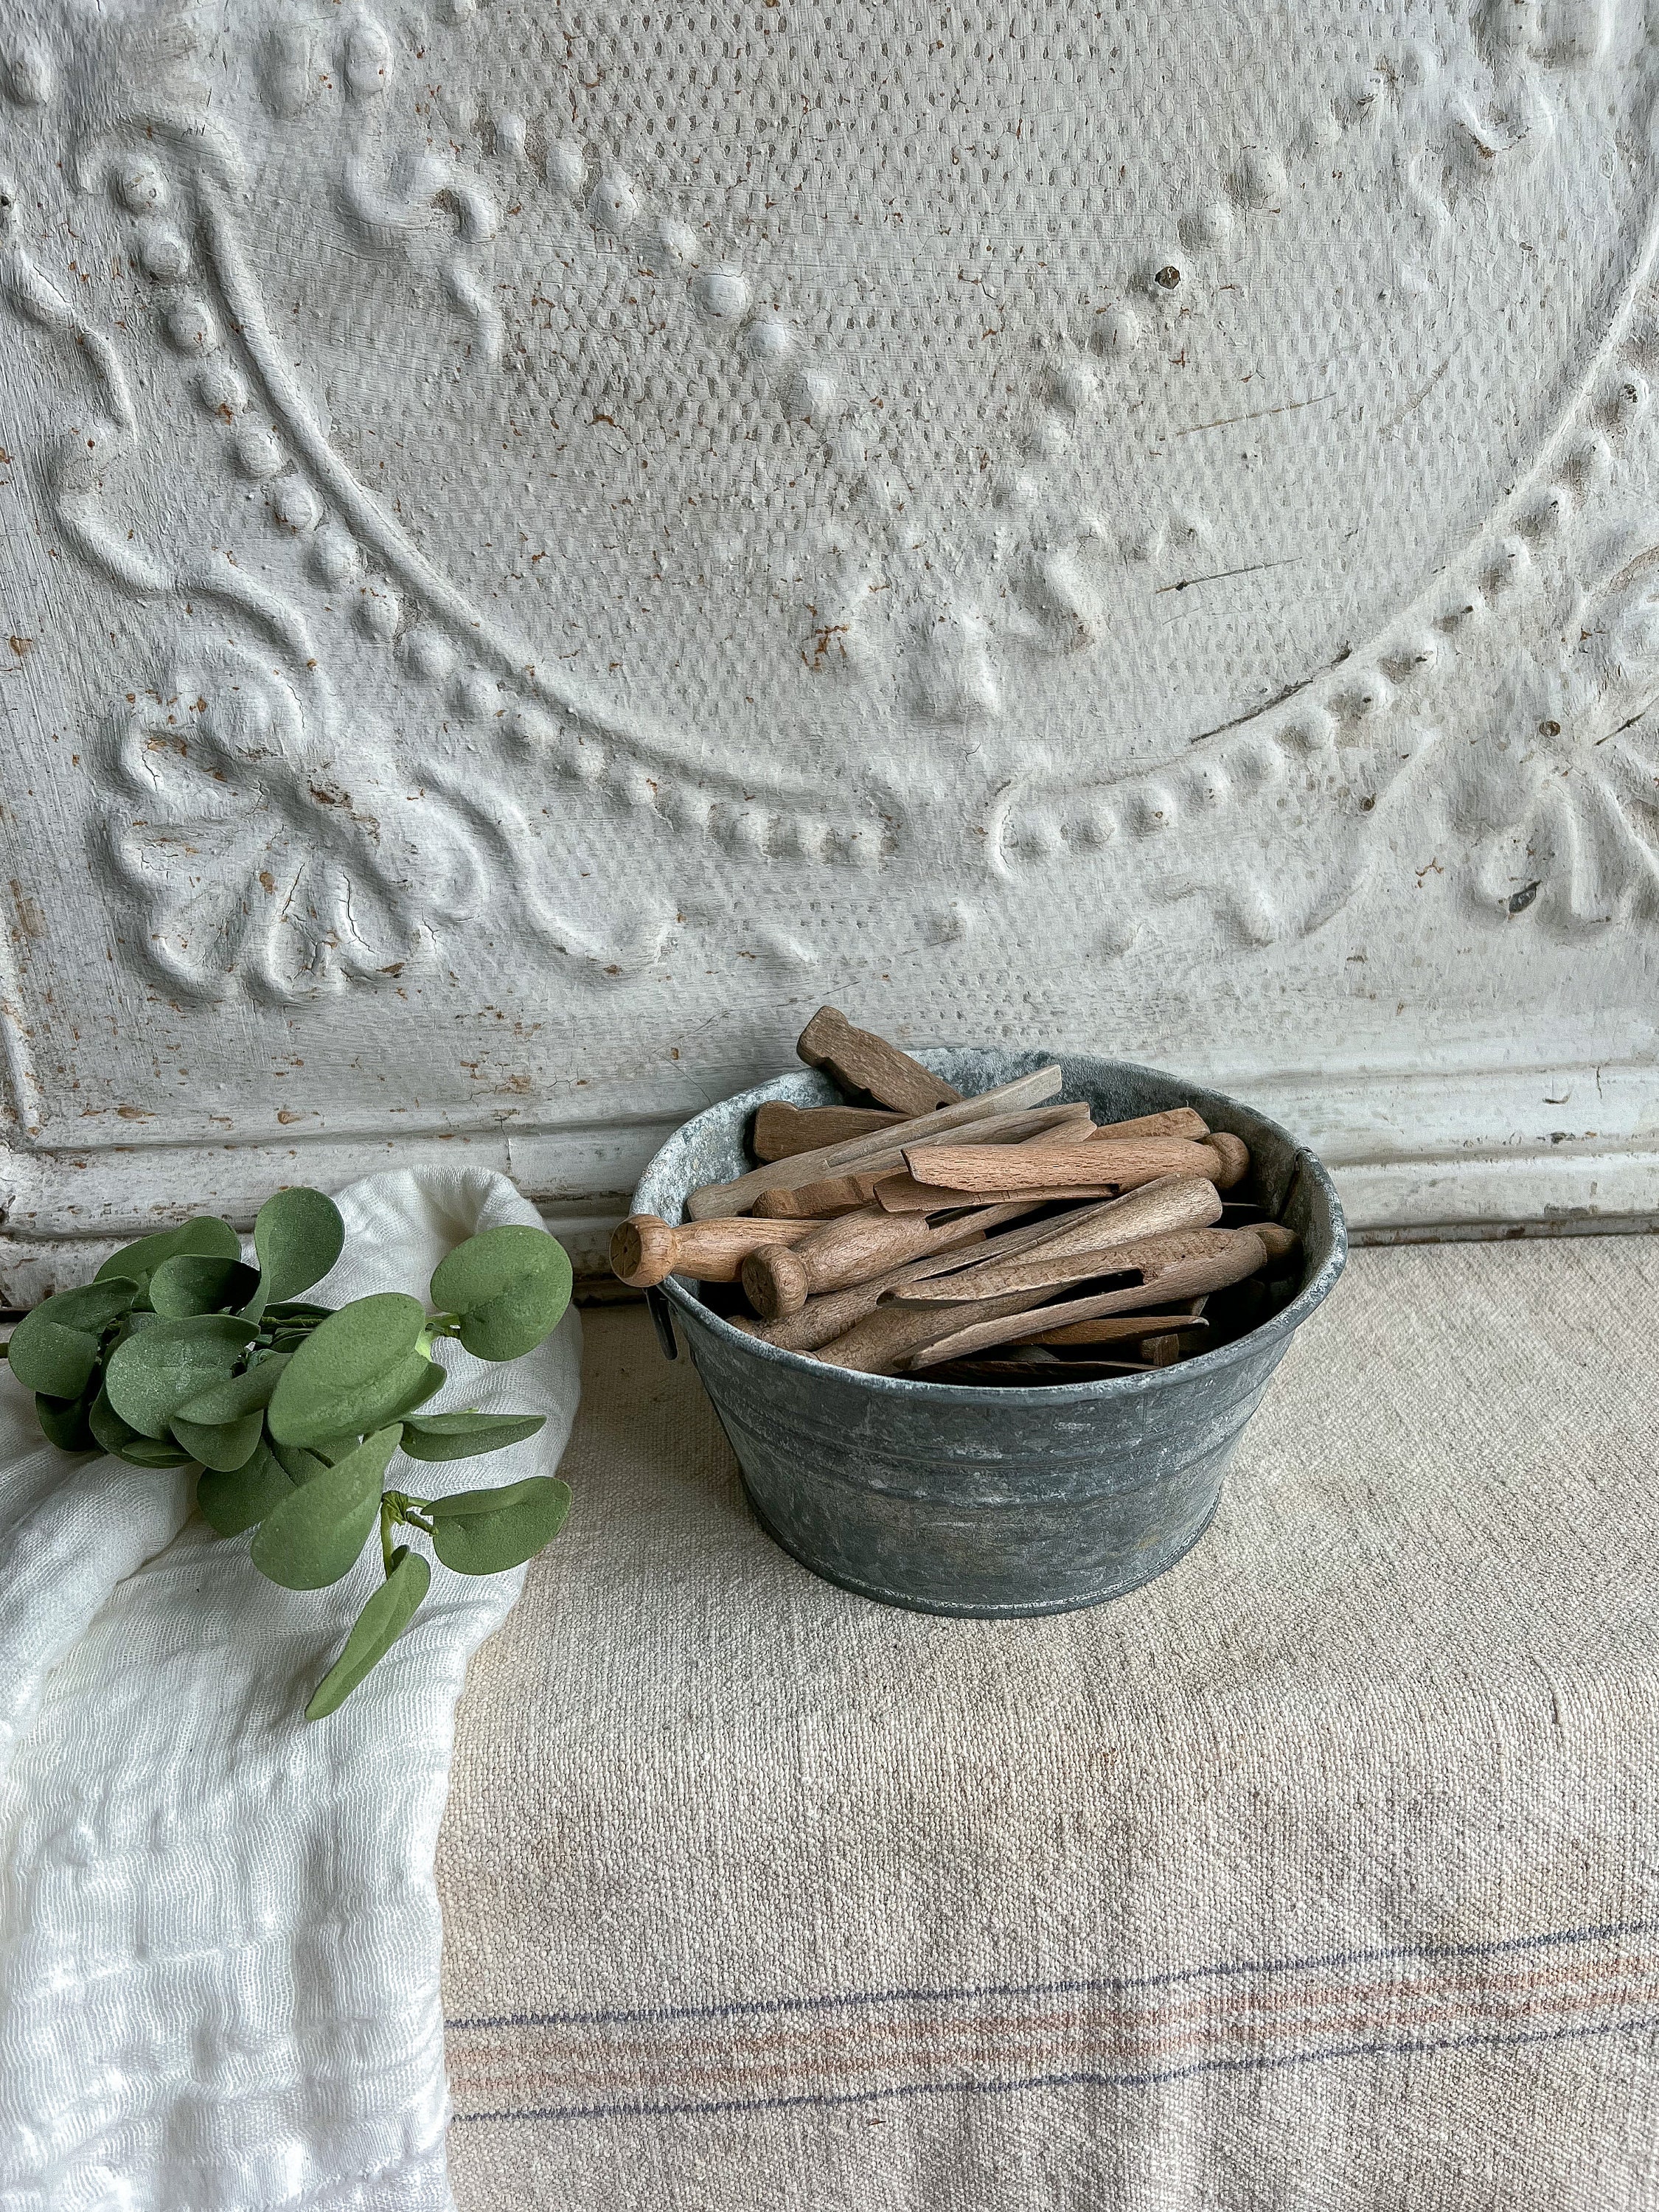 Close Image Old Fashioned Wooden Cloth Pins Laundry Tub Stock Photo by  ©shutterbug68 246596224